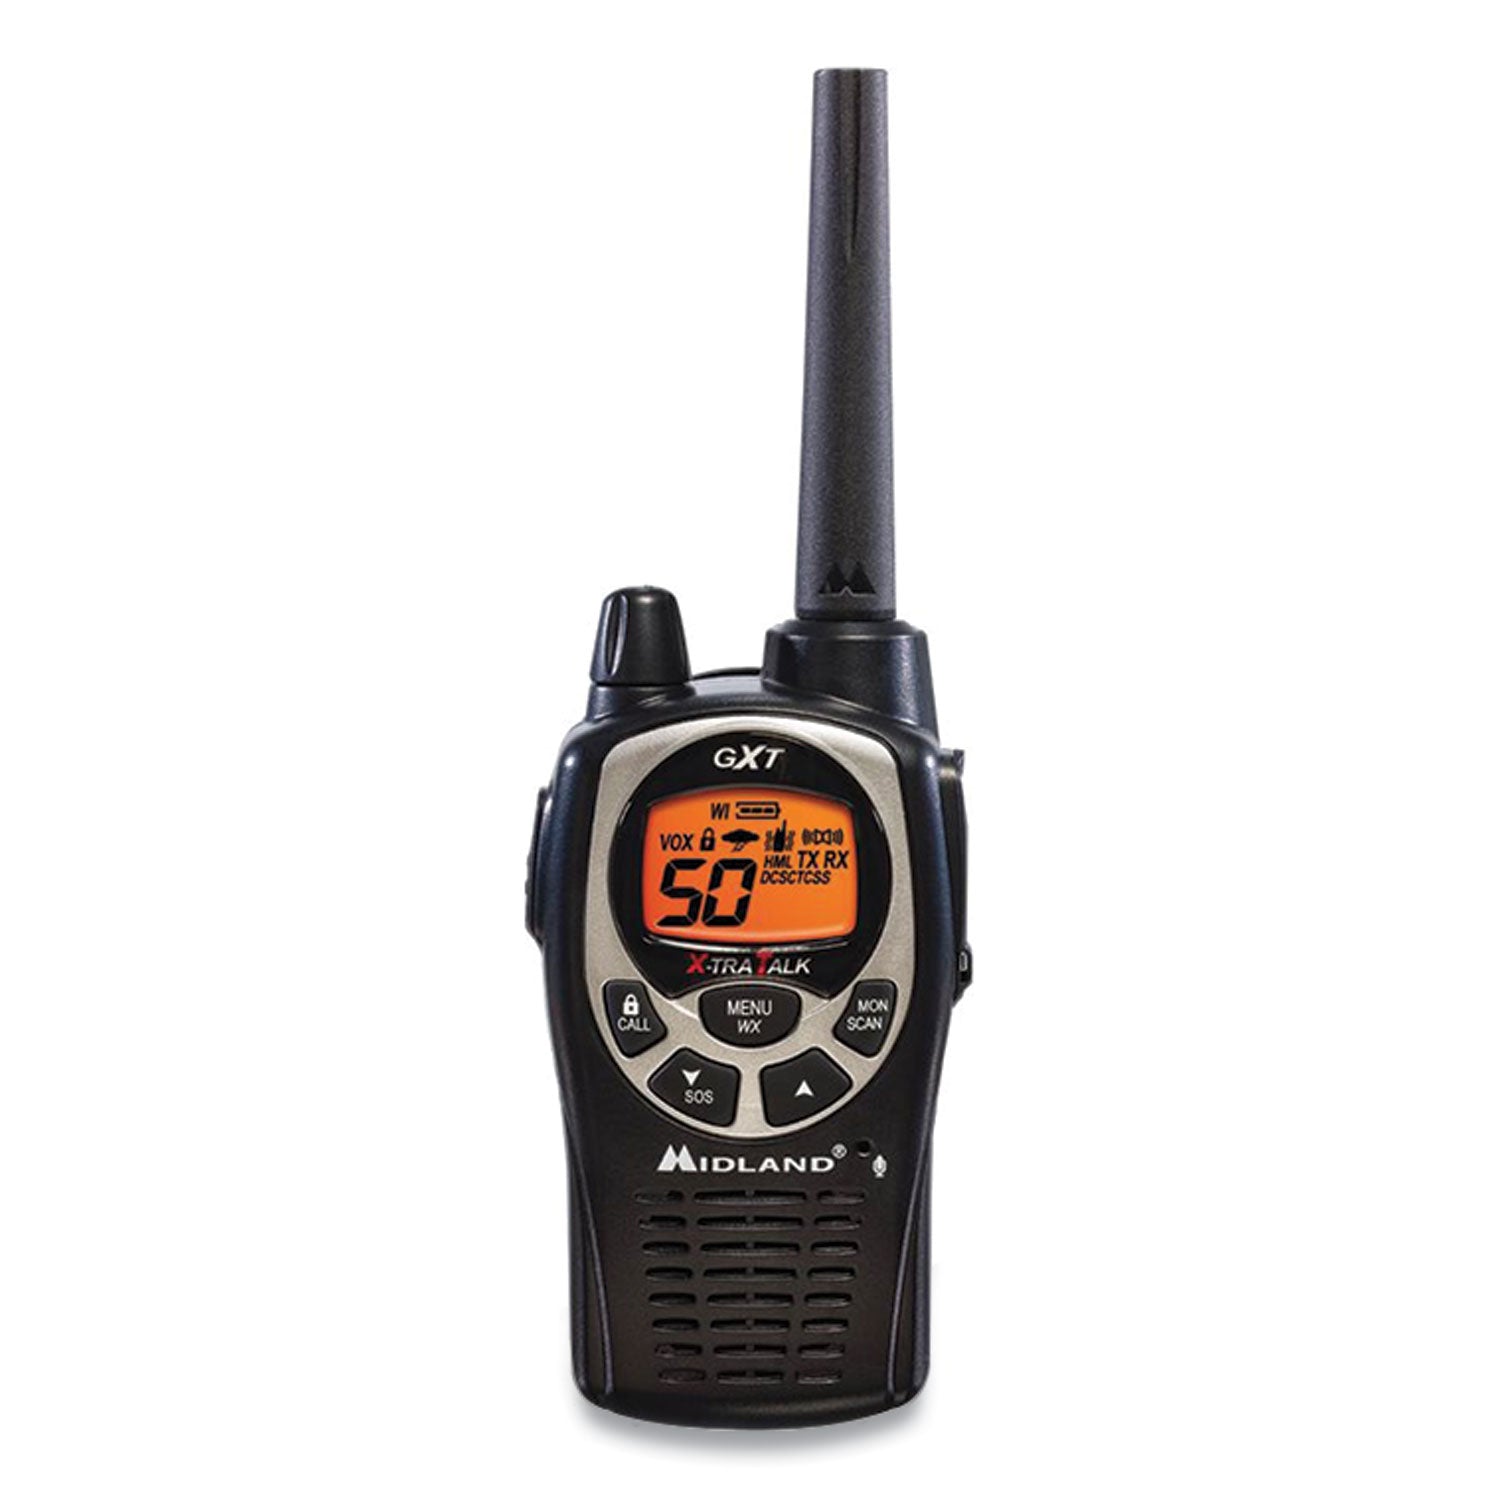 GXT1000VP4 Two-Way Radio, 50 Channels - 